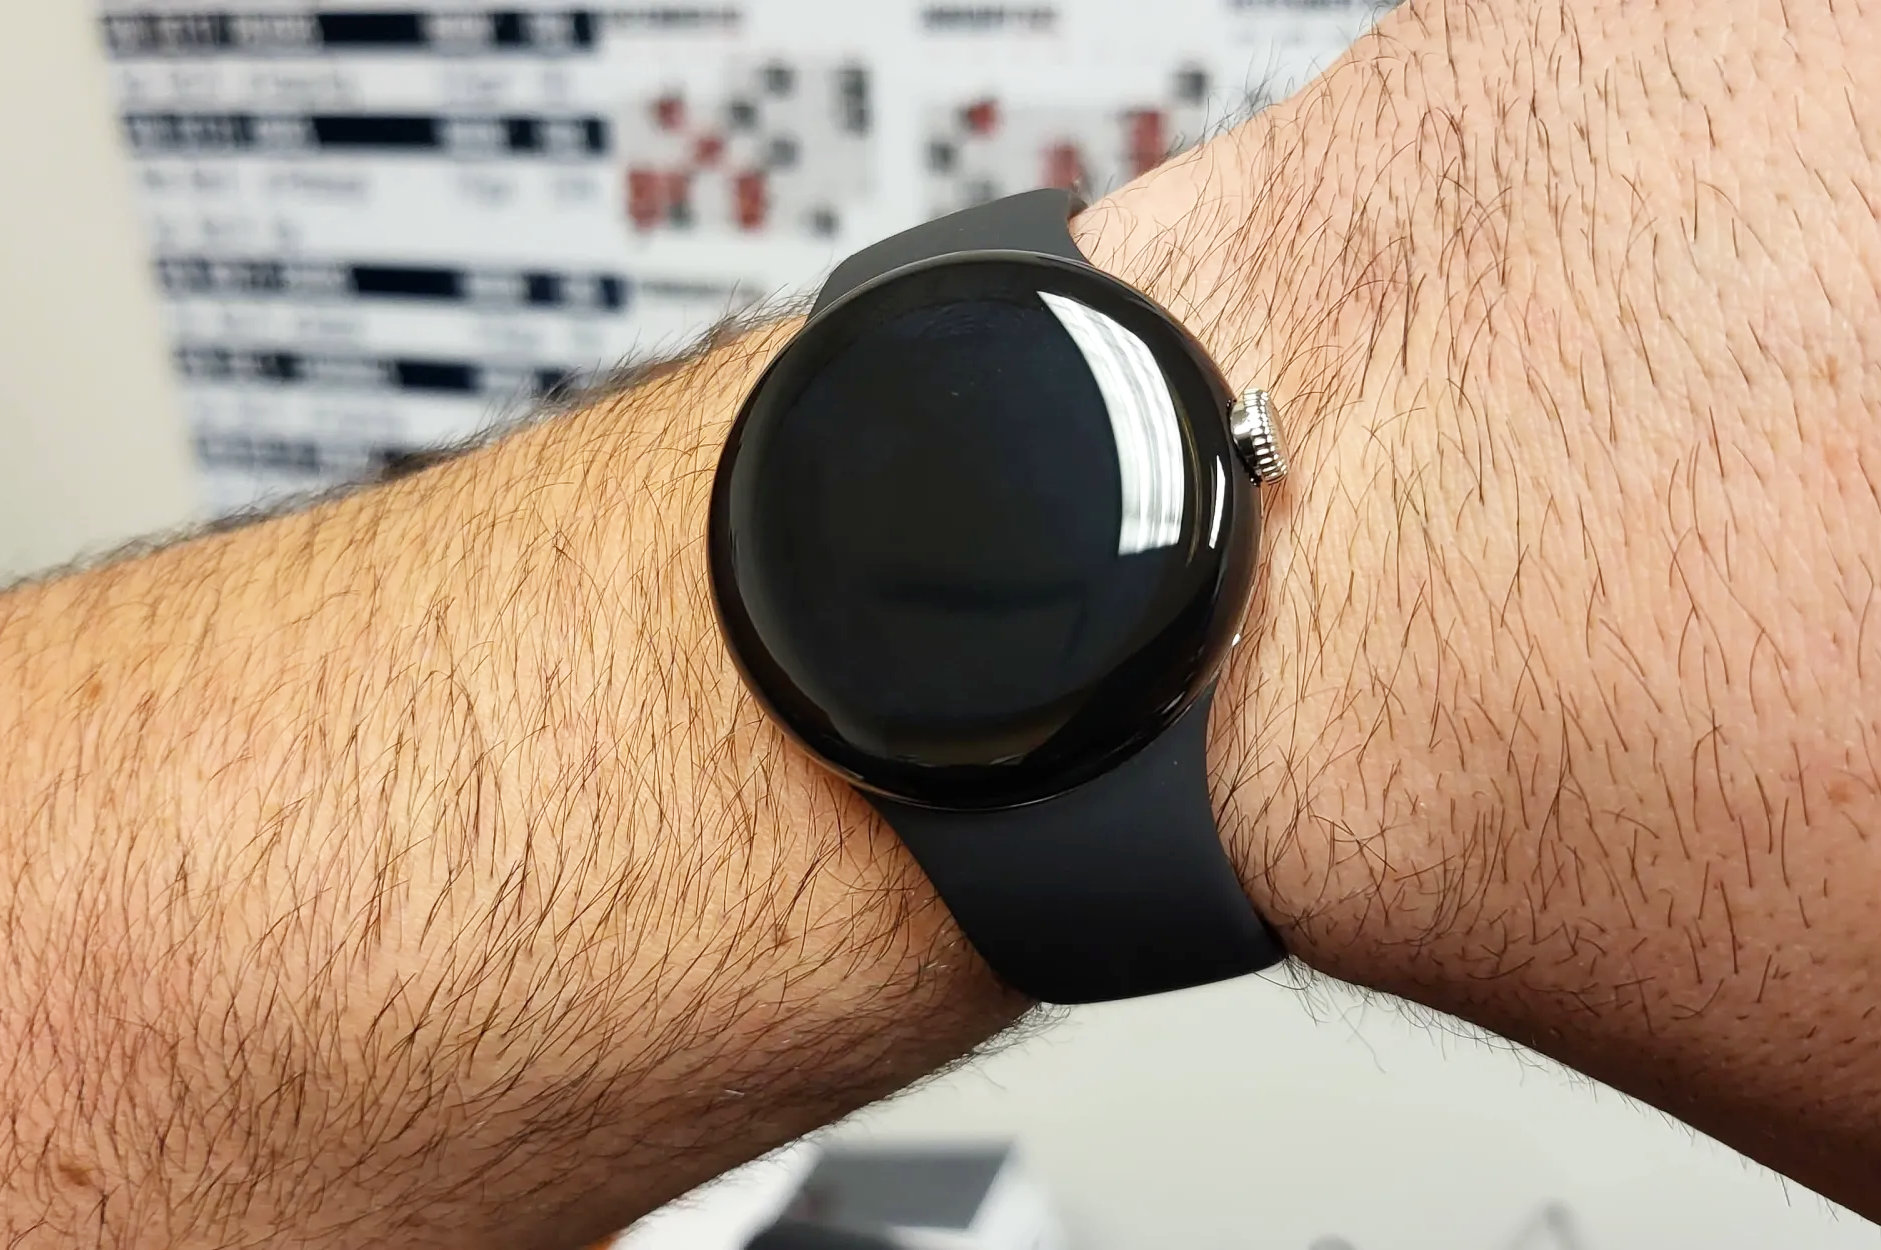 Pixel Watch Hands On: Google's First Smartwatch Shows Promise | PCMag